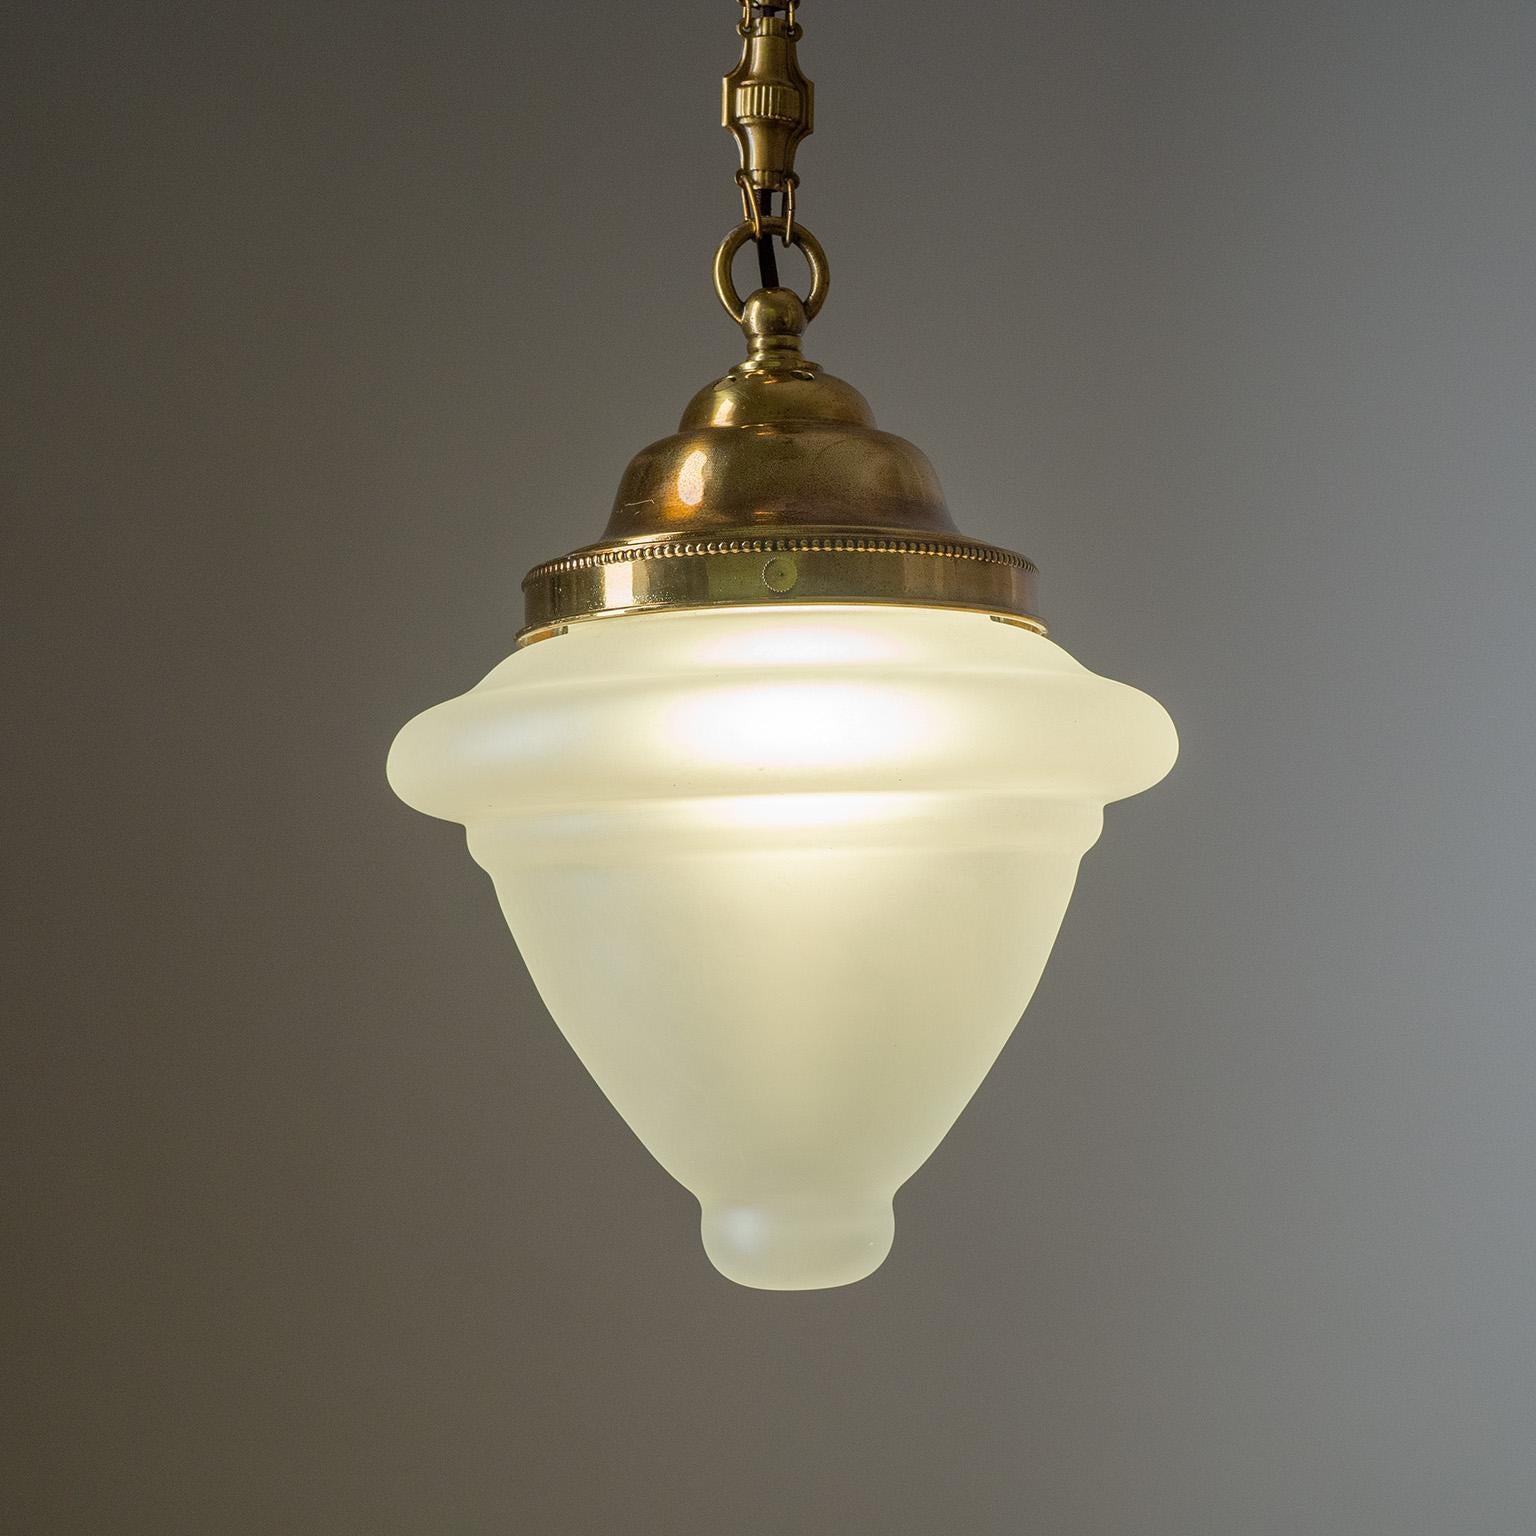 Brass Pendant With Satin Glass, 1920s For Sale 3